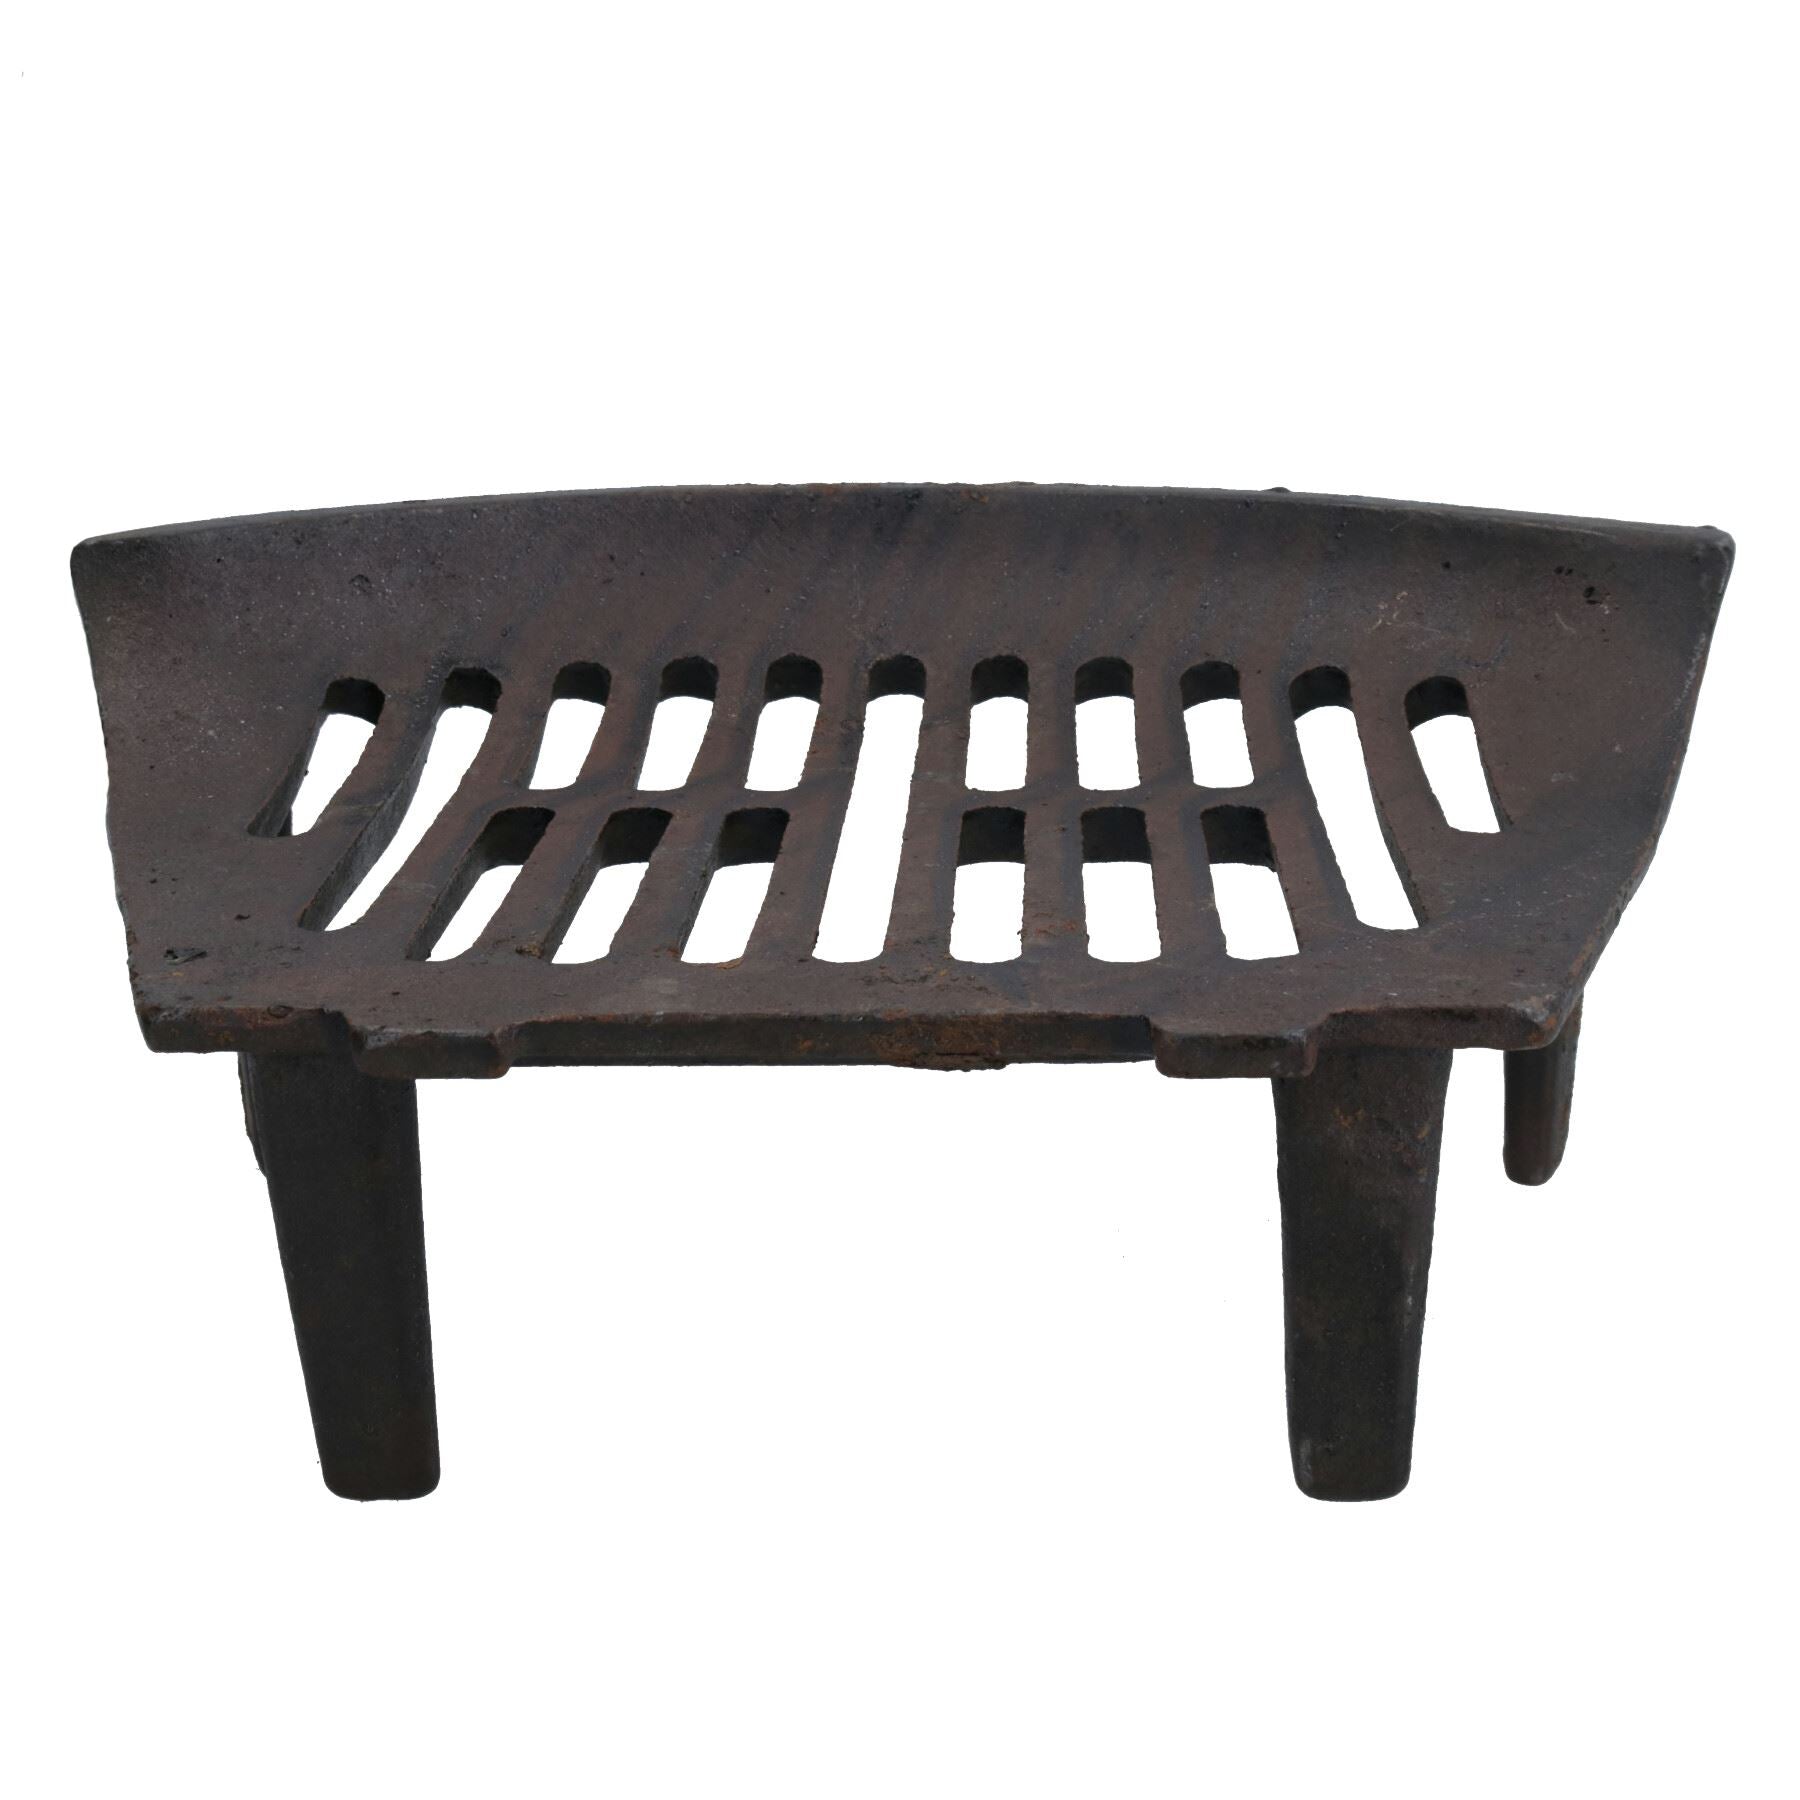 13" Fire Grate For 14" Fireplace Cast Iron Coal Log Black Front RUSTY